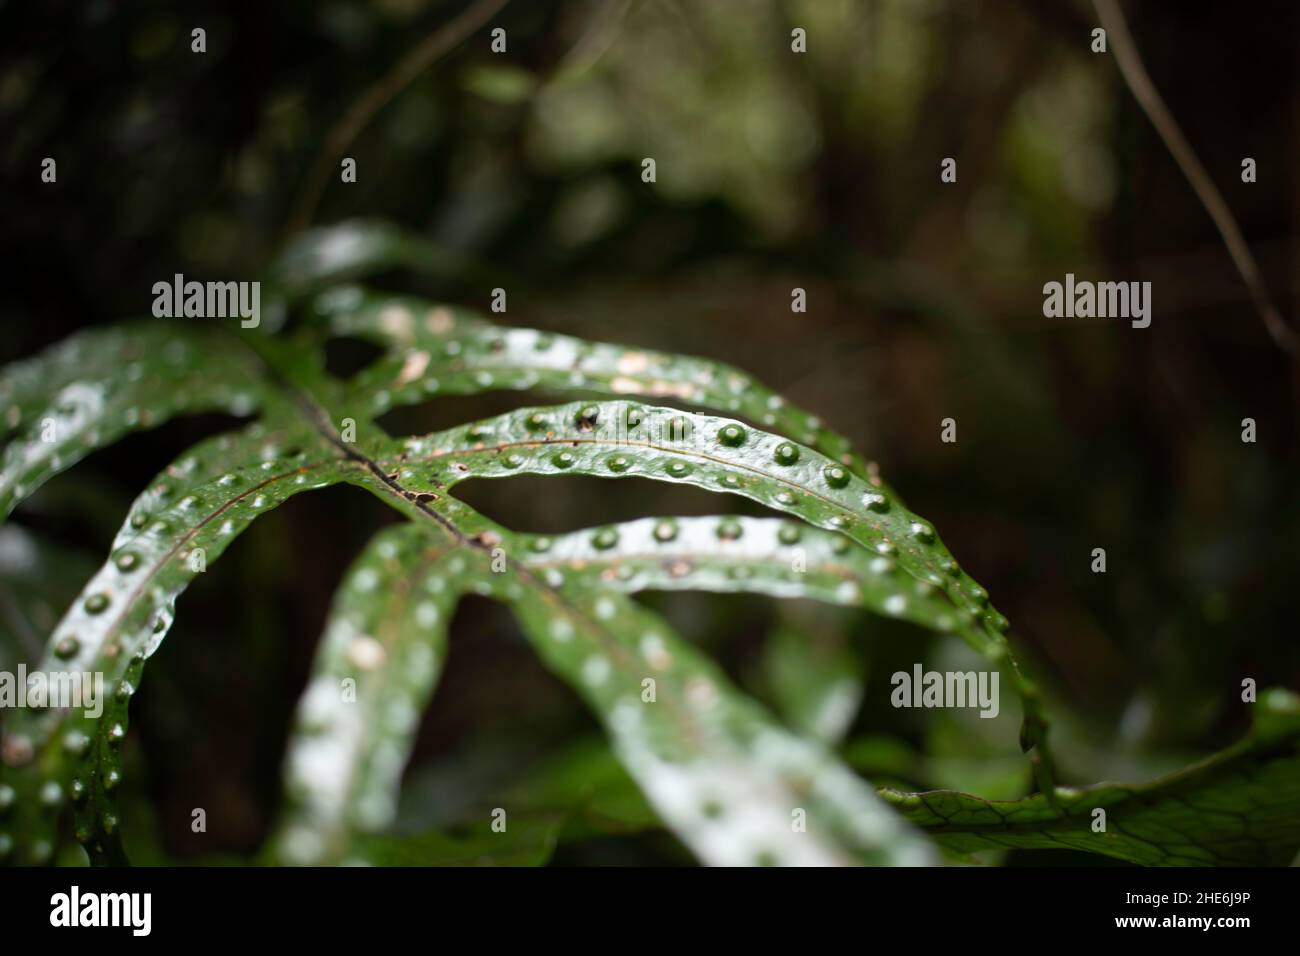 Close-up shot of a green Cryptocoryne plant on a dark and blurred background Stock Photo